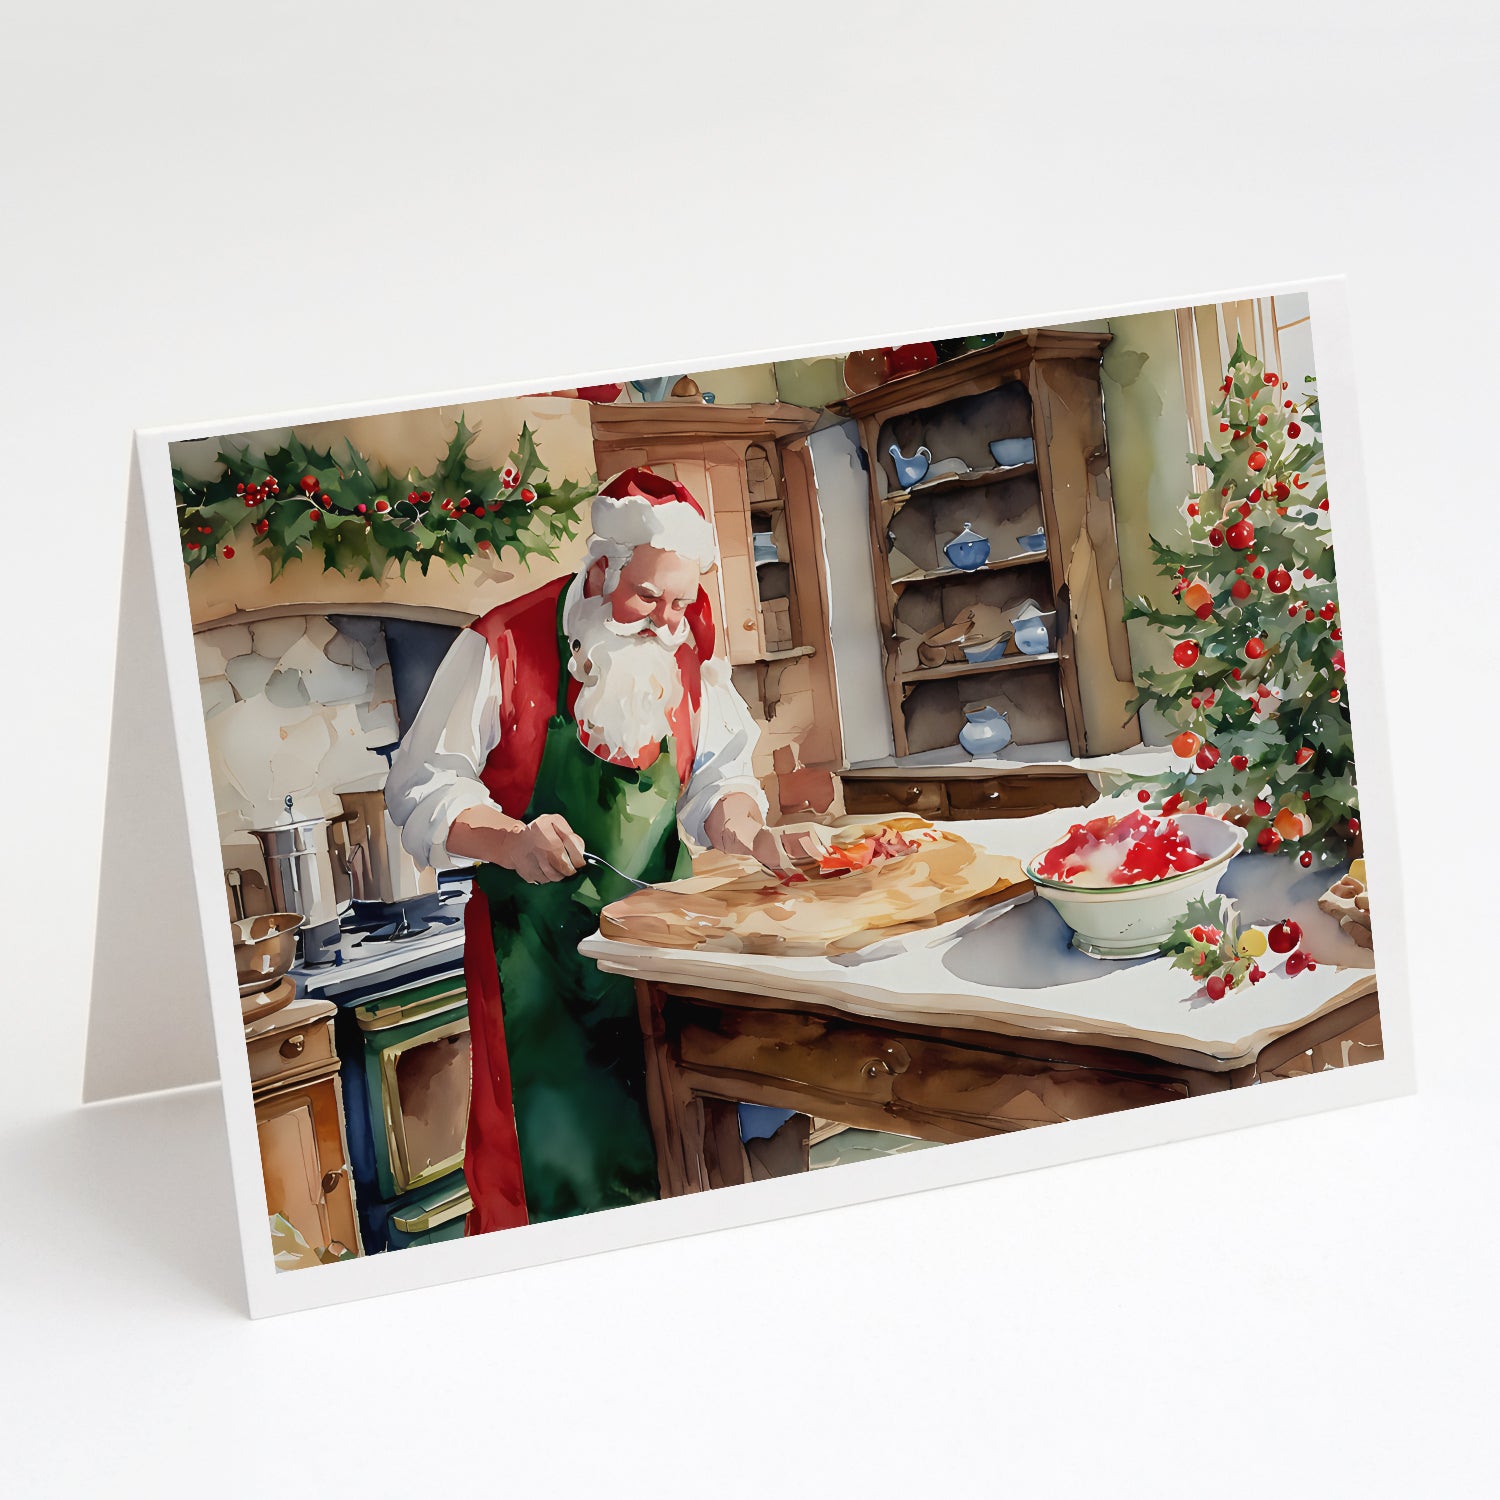 Buy this Cookies with Santa Claus Greeting Cards Pack of 8